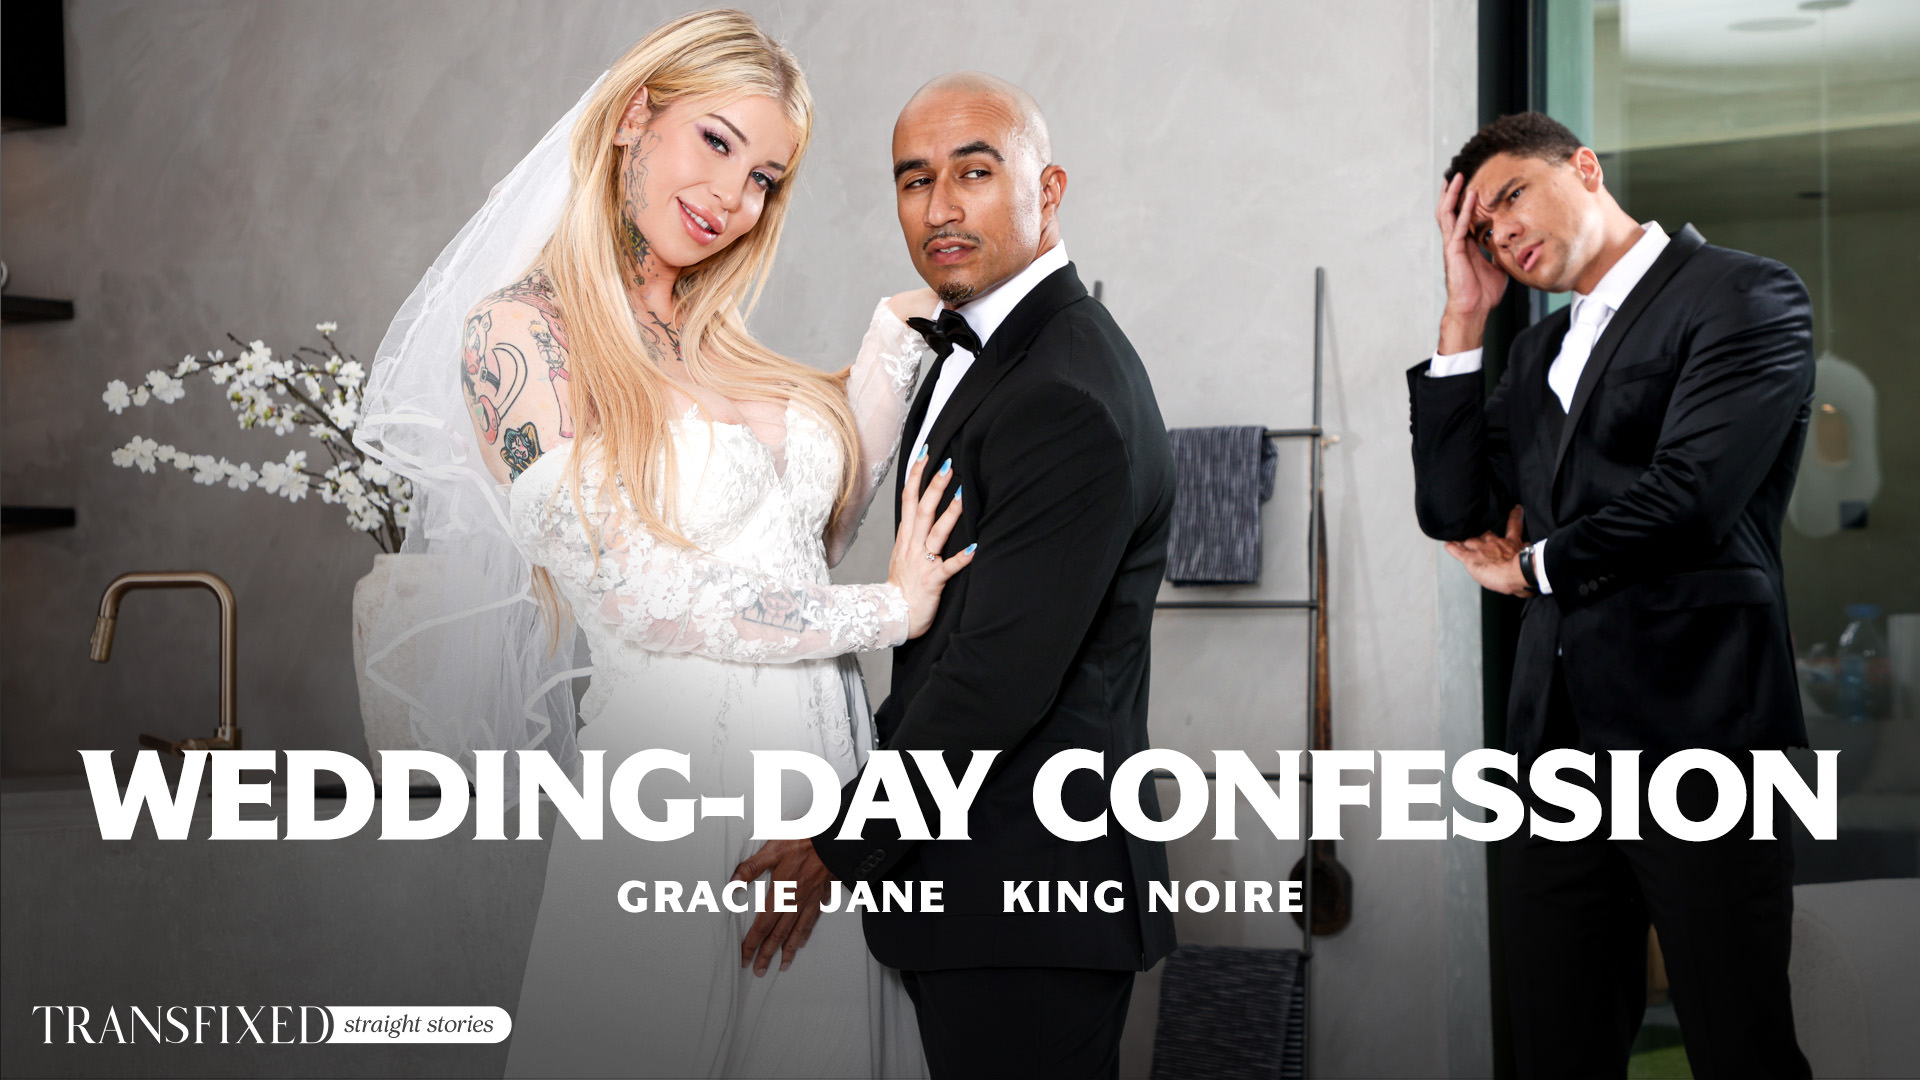 Gracie Jane, King Noire Wedding-Day Confession Transfixed